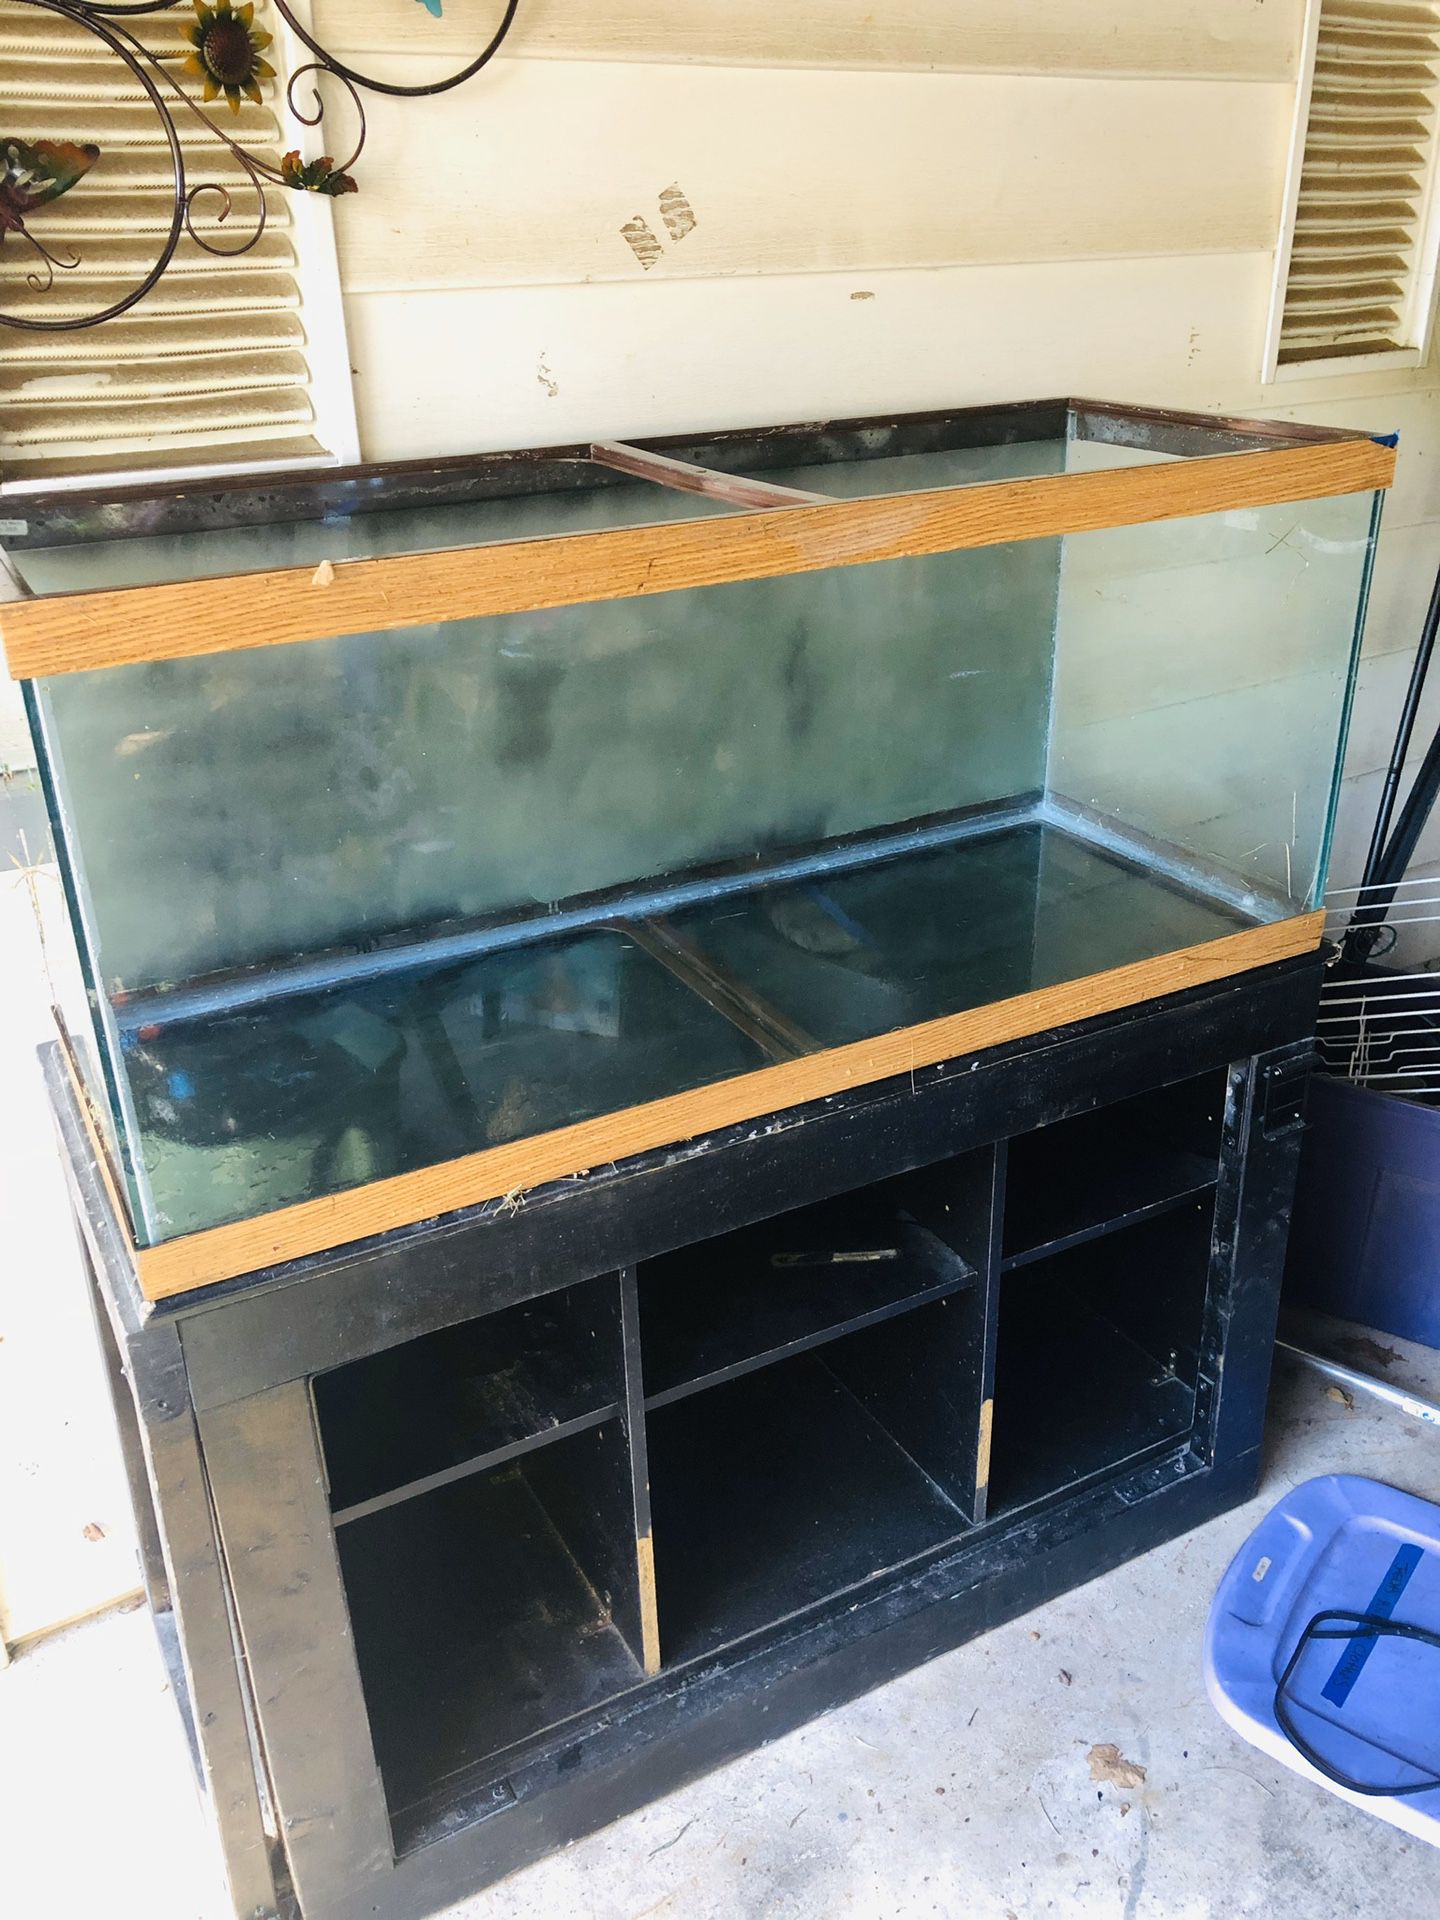 Fish tank 75 gallon with black sturdy stand